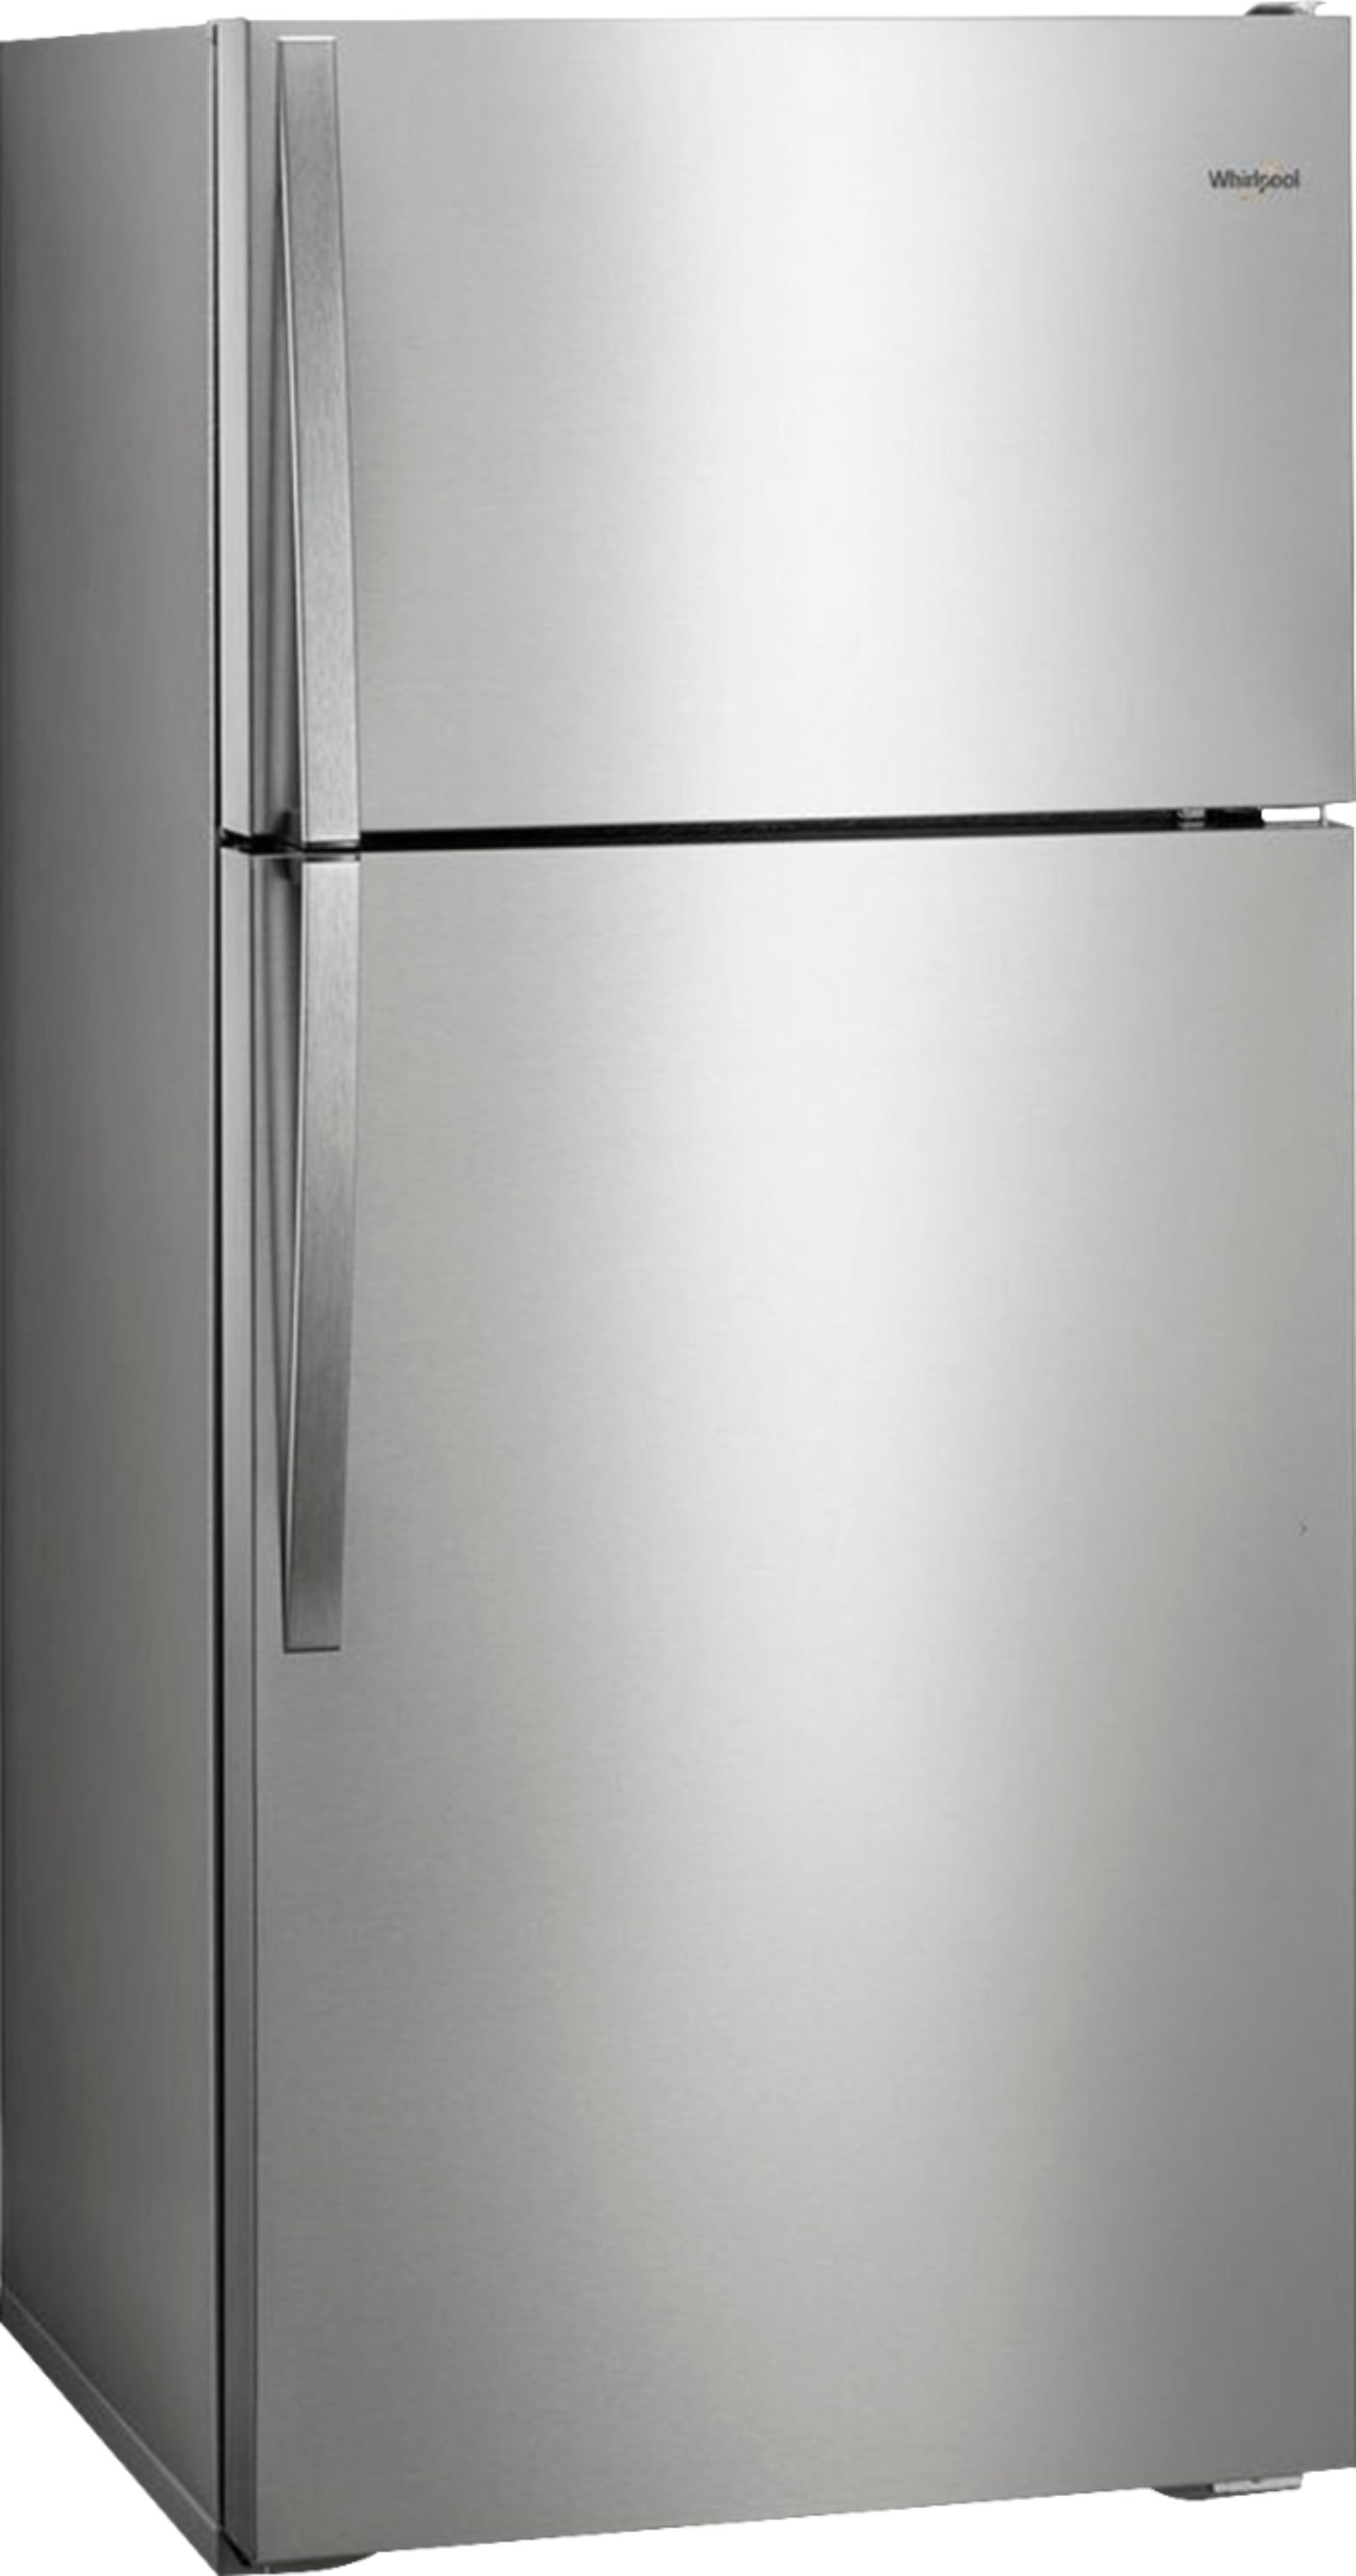 Angle View: Whirlpool - 14.3 Cu. Ft. Top-Freezer Refrigerator - Monochromatic Stainless Steel